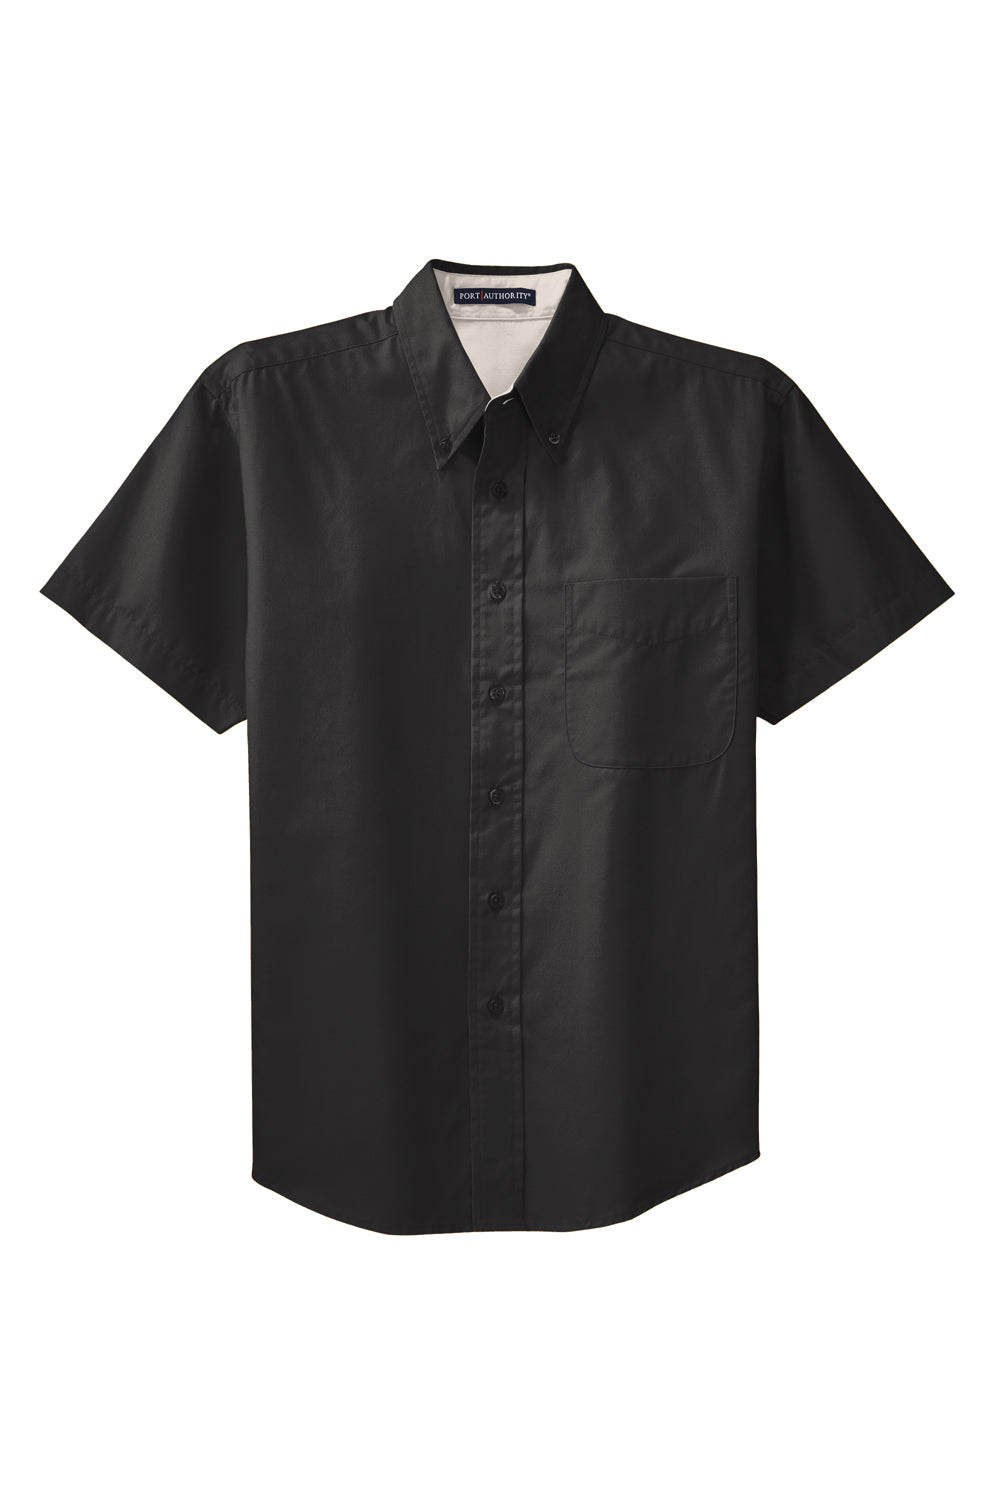 Port Authority S508/TLS508 Mens Easy Care Wrinkle Resistant Short Sleeve Button Down Shirt w/ Pocket Black Flat Front